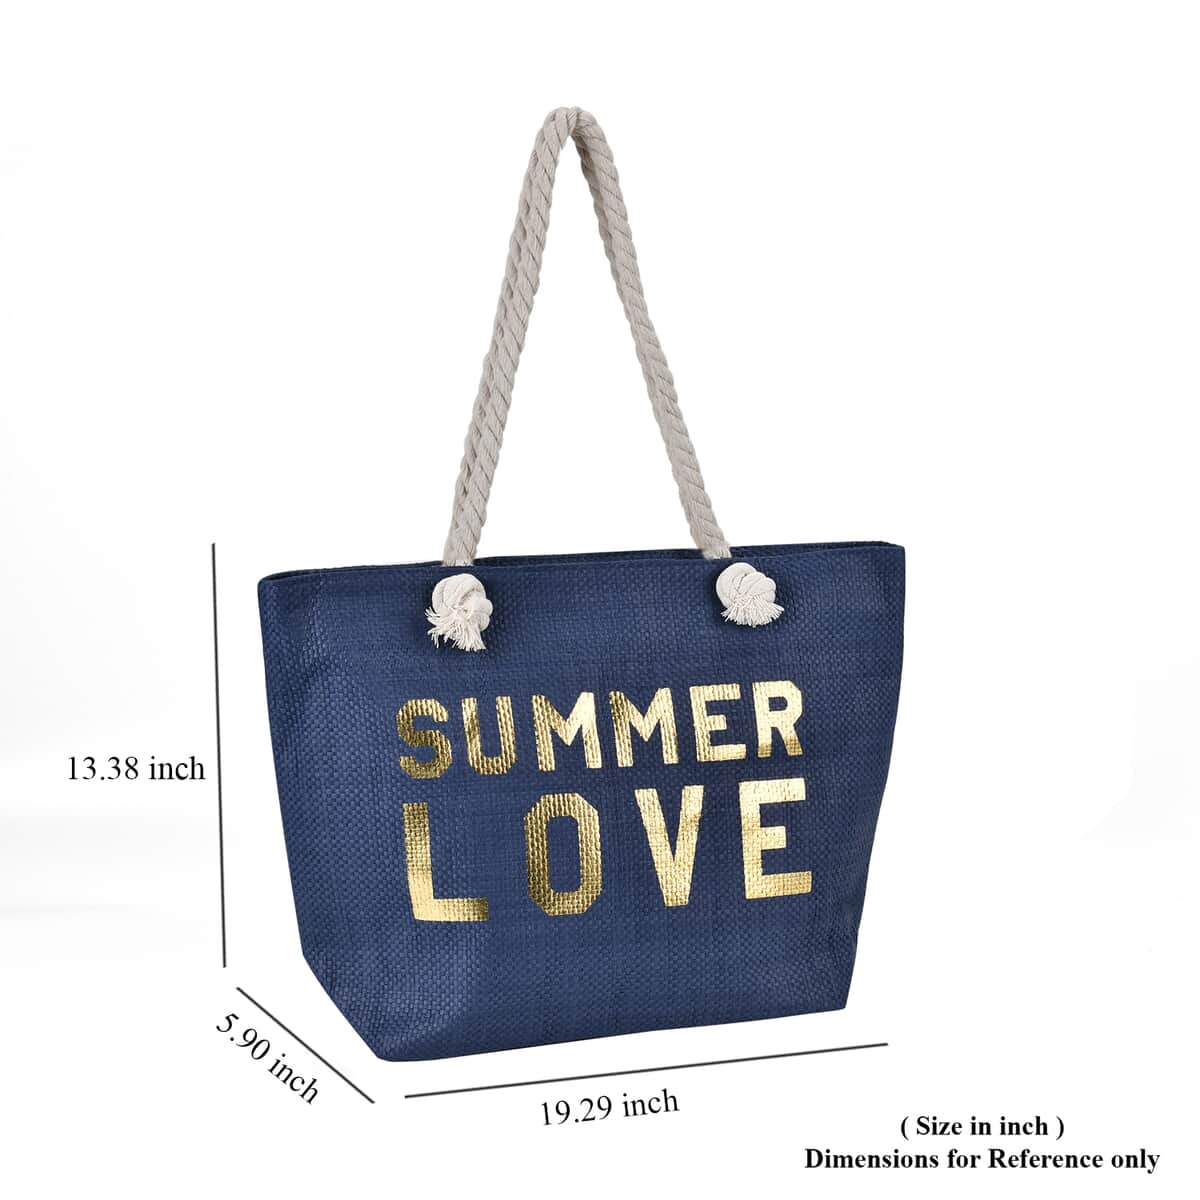 Paper Tote Bag with Printed SUMMER LOVE - Navy image number 4